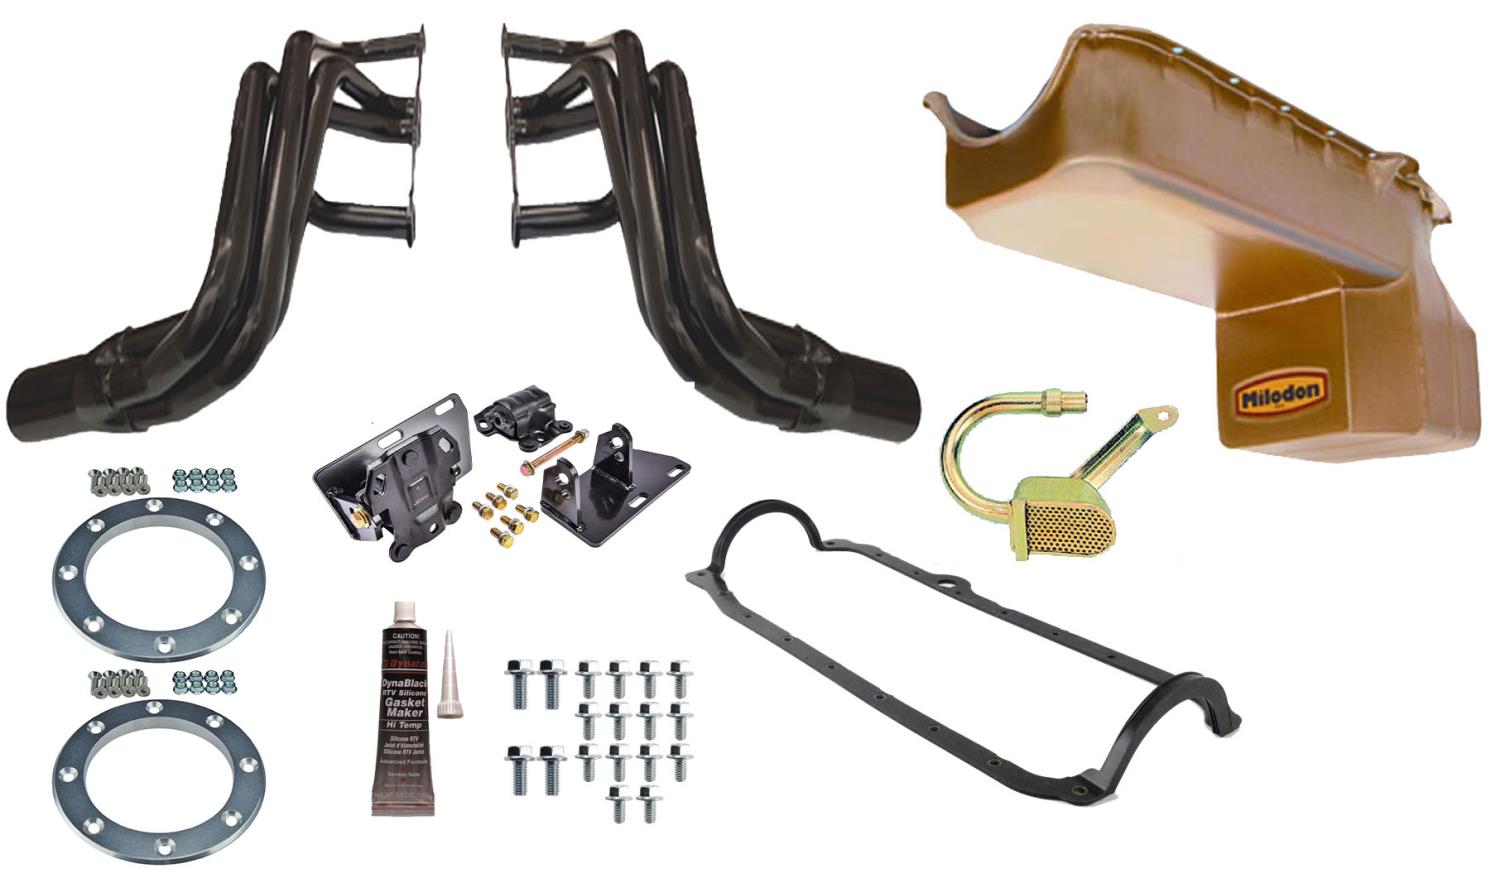 Forward Exit Conversion Header Kit 1994-2004 Chevy S-10 Truck - Standard Port Small Block Chevy